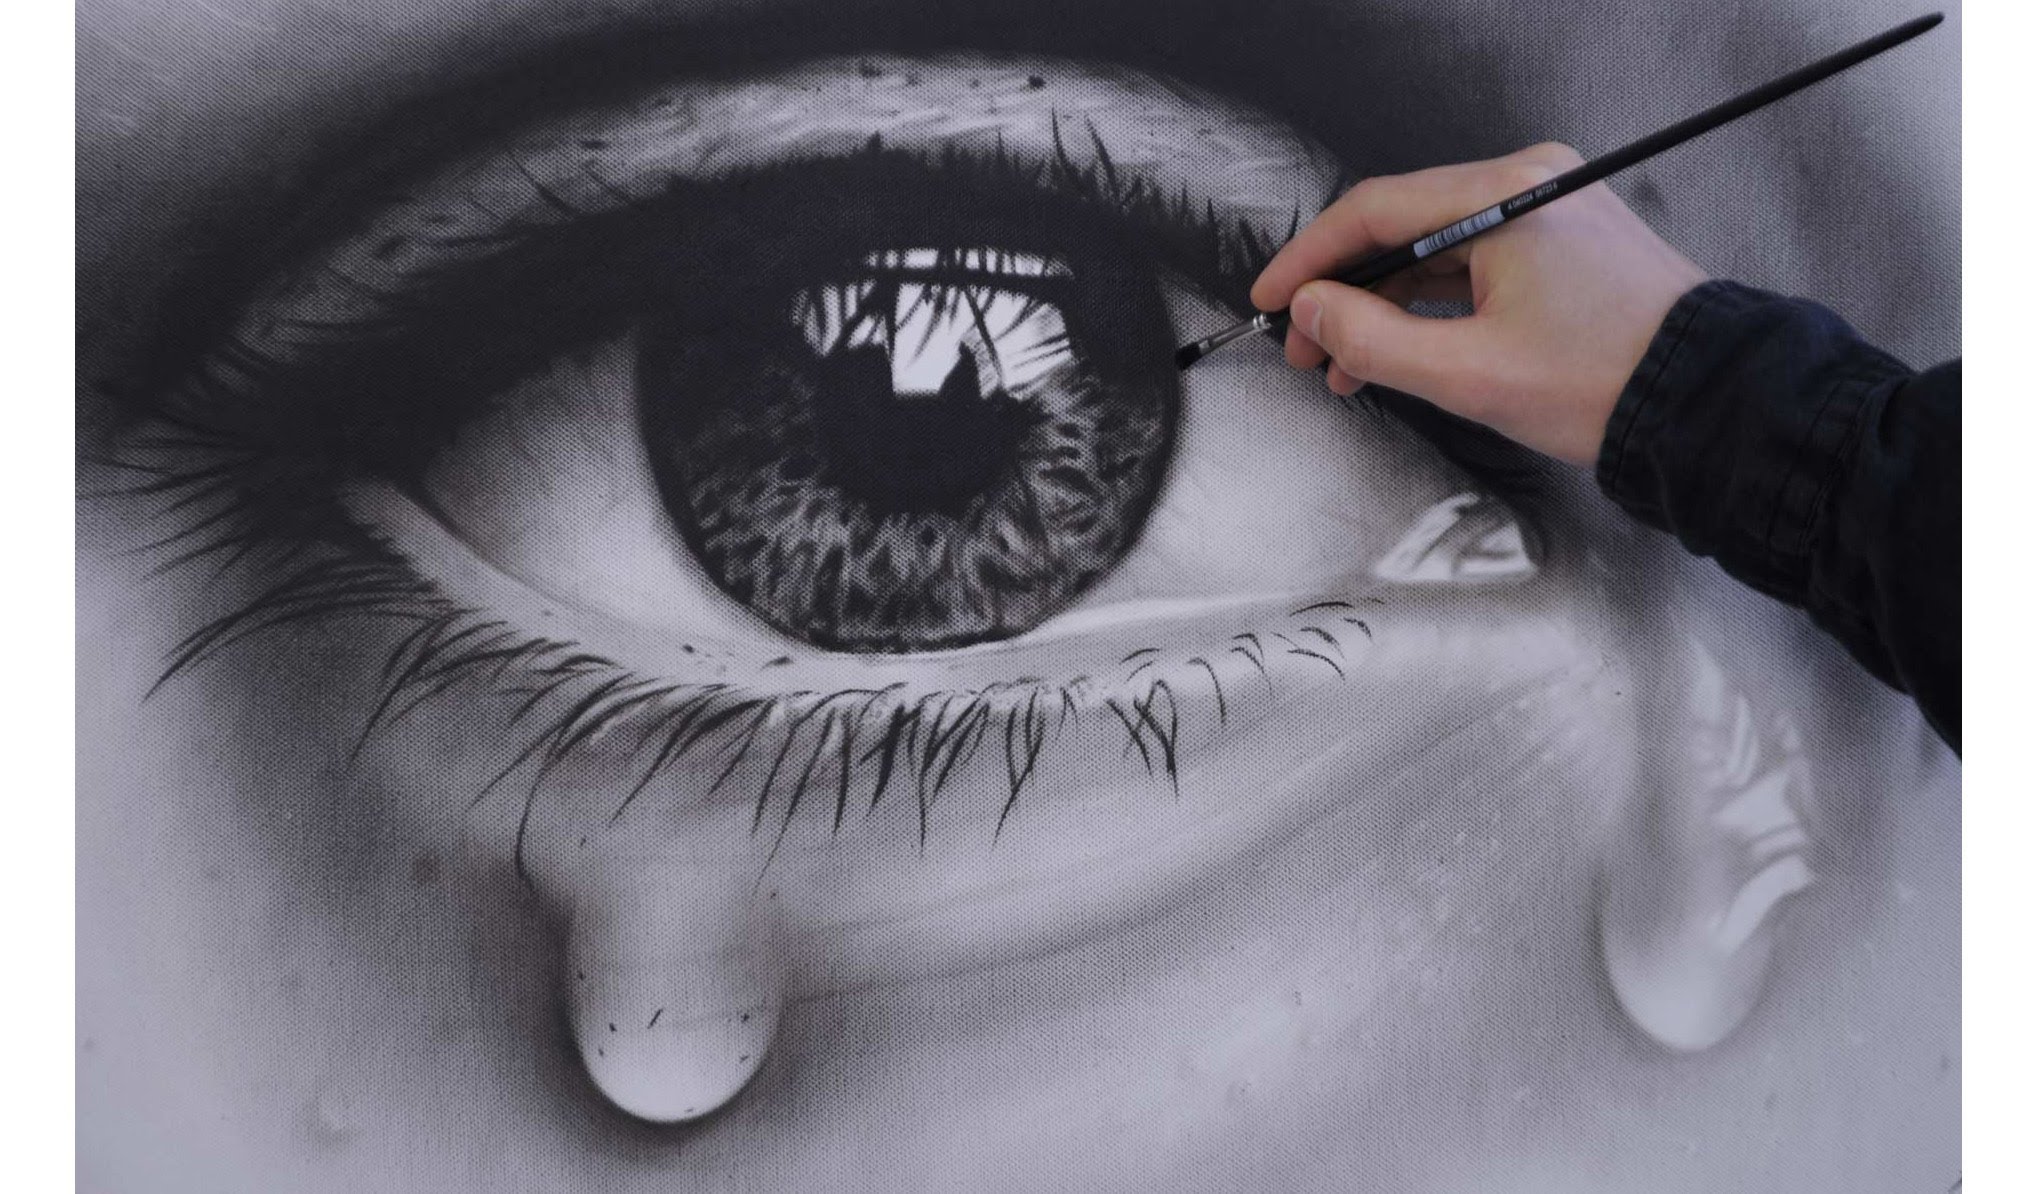 2019x1194 How To Draw A Realistic Eye With Teardrop Speed Painting - Sad Ey...